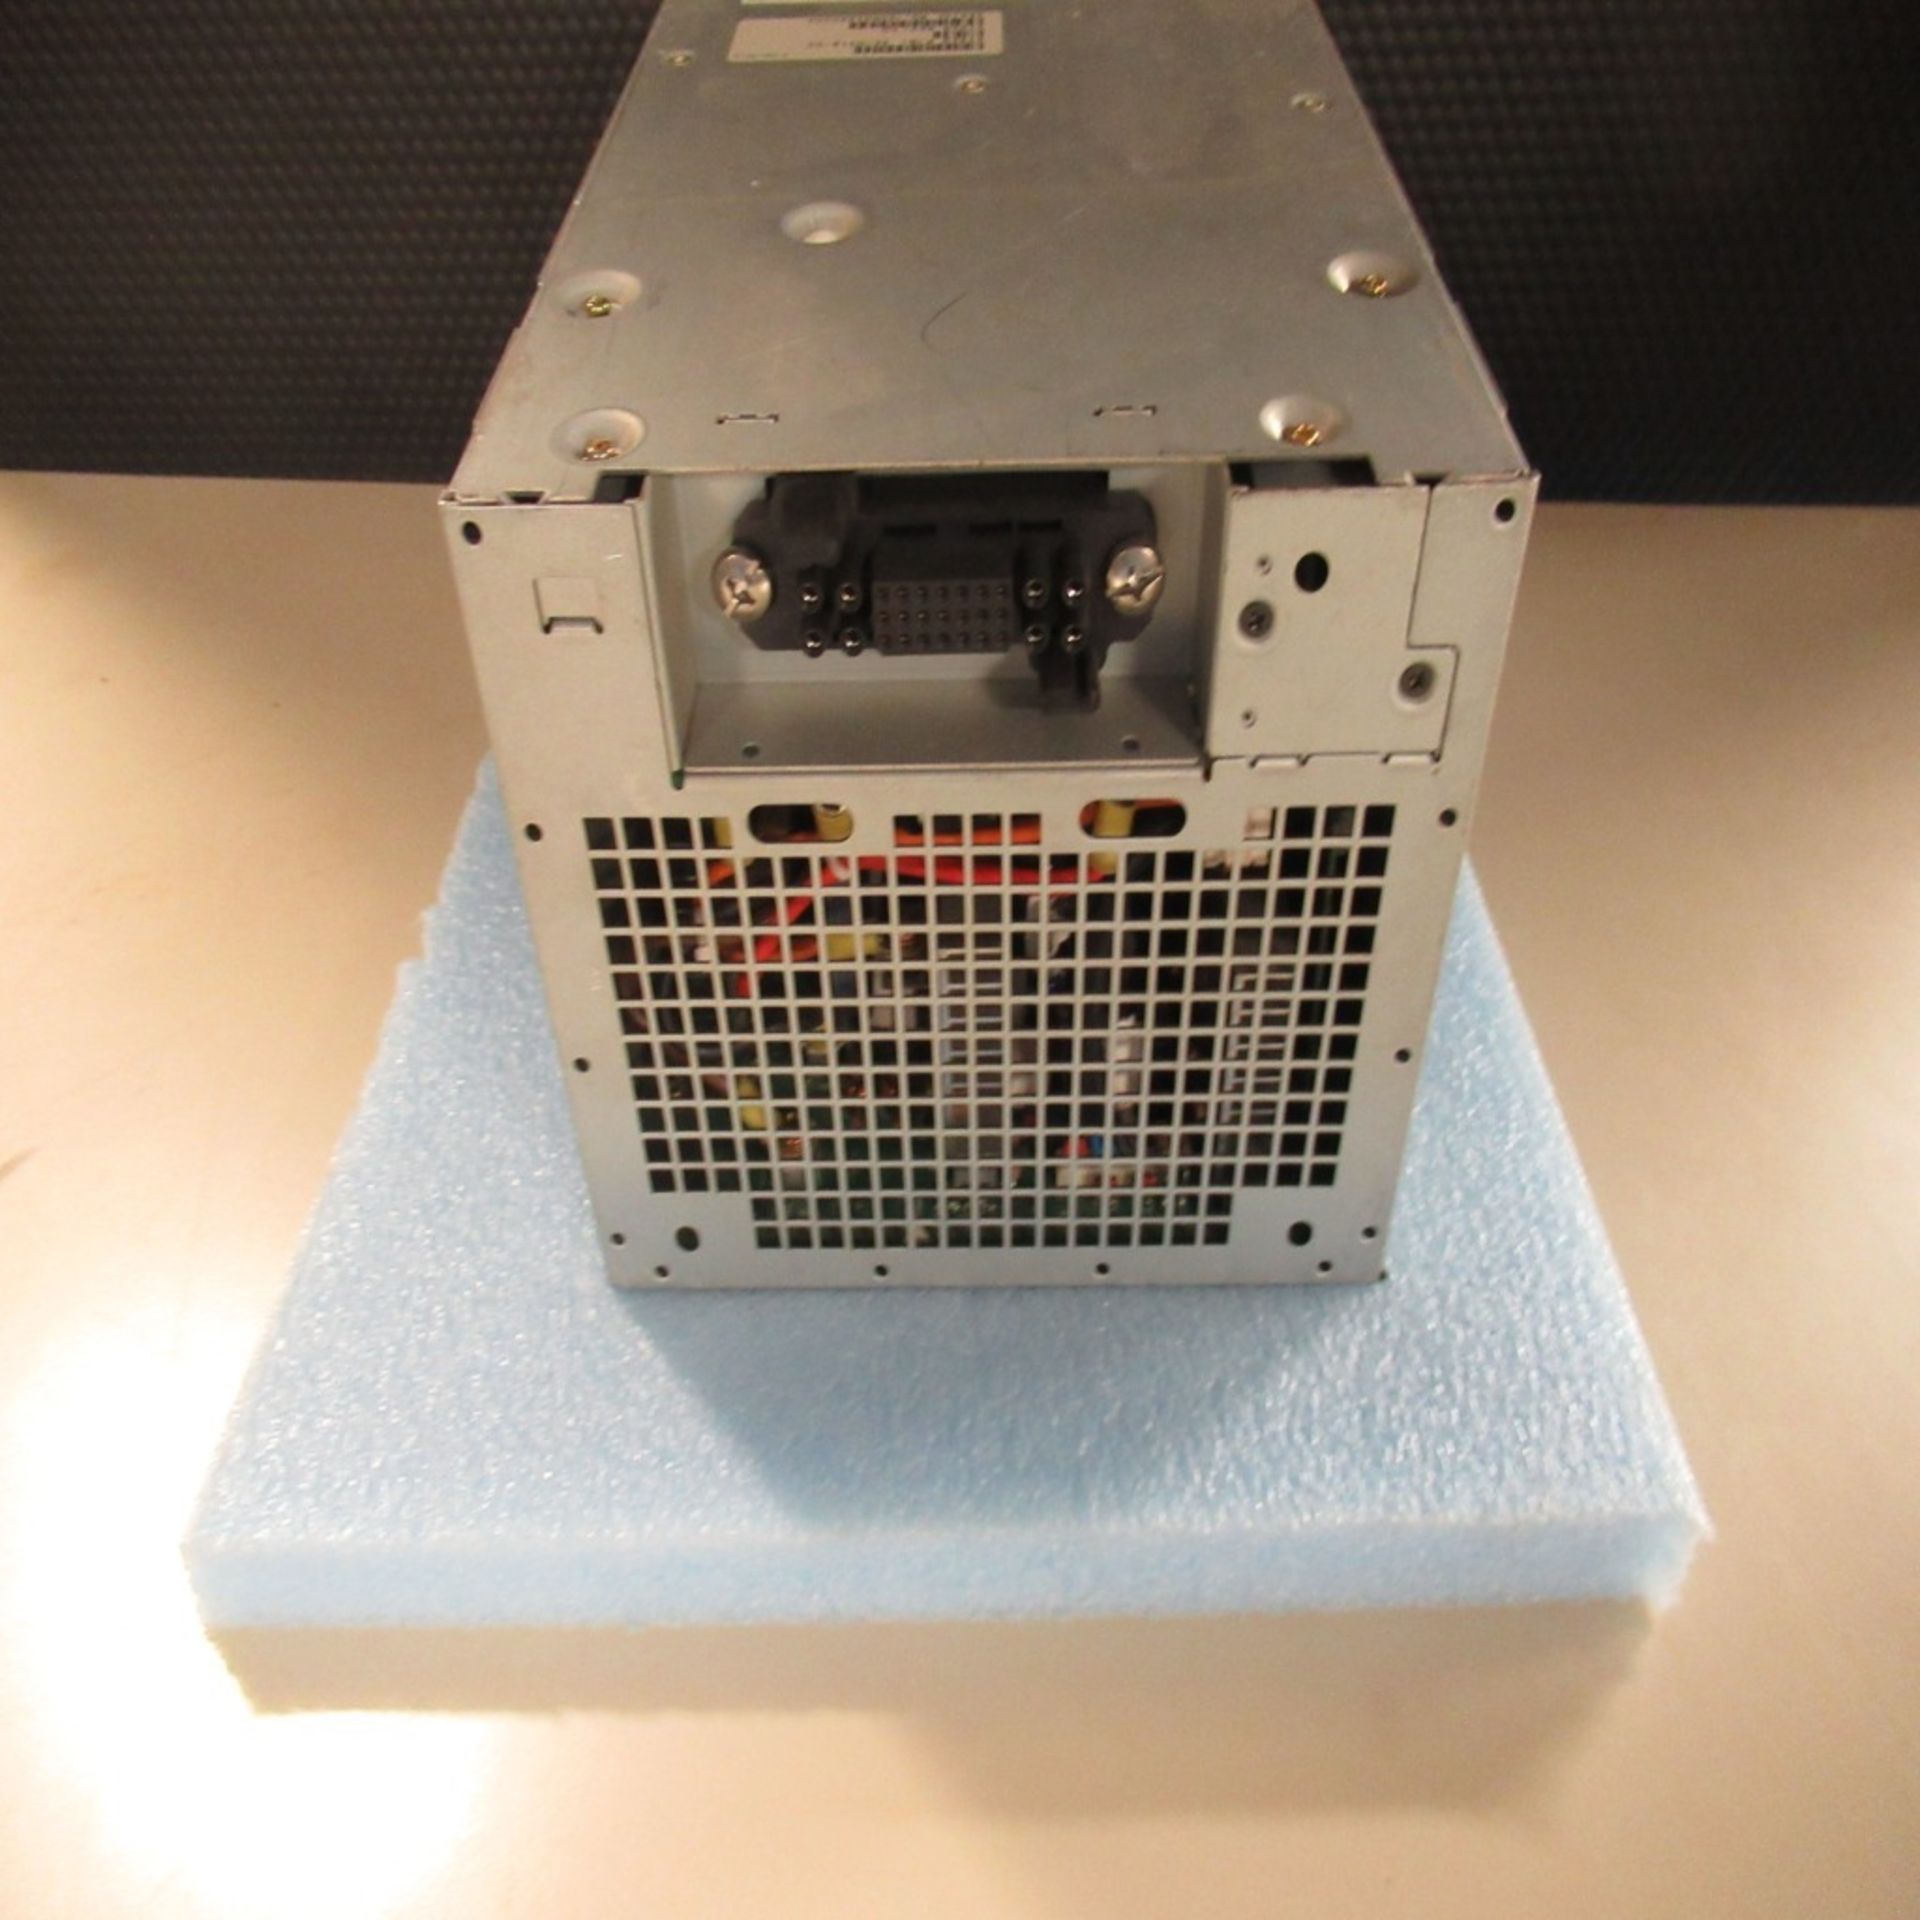 PHOTON SNAP SHOT MODEL 6000 *POWERS ON* NO SCREEN DISPLAY; FARNELL AP20-80 REGULATED POWER SUPPLY * - Image 173 of 222